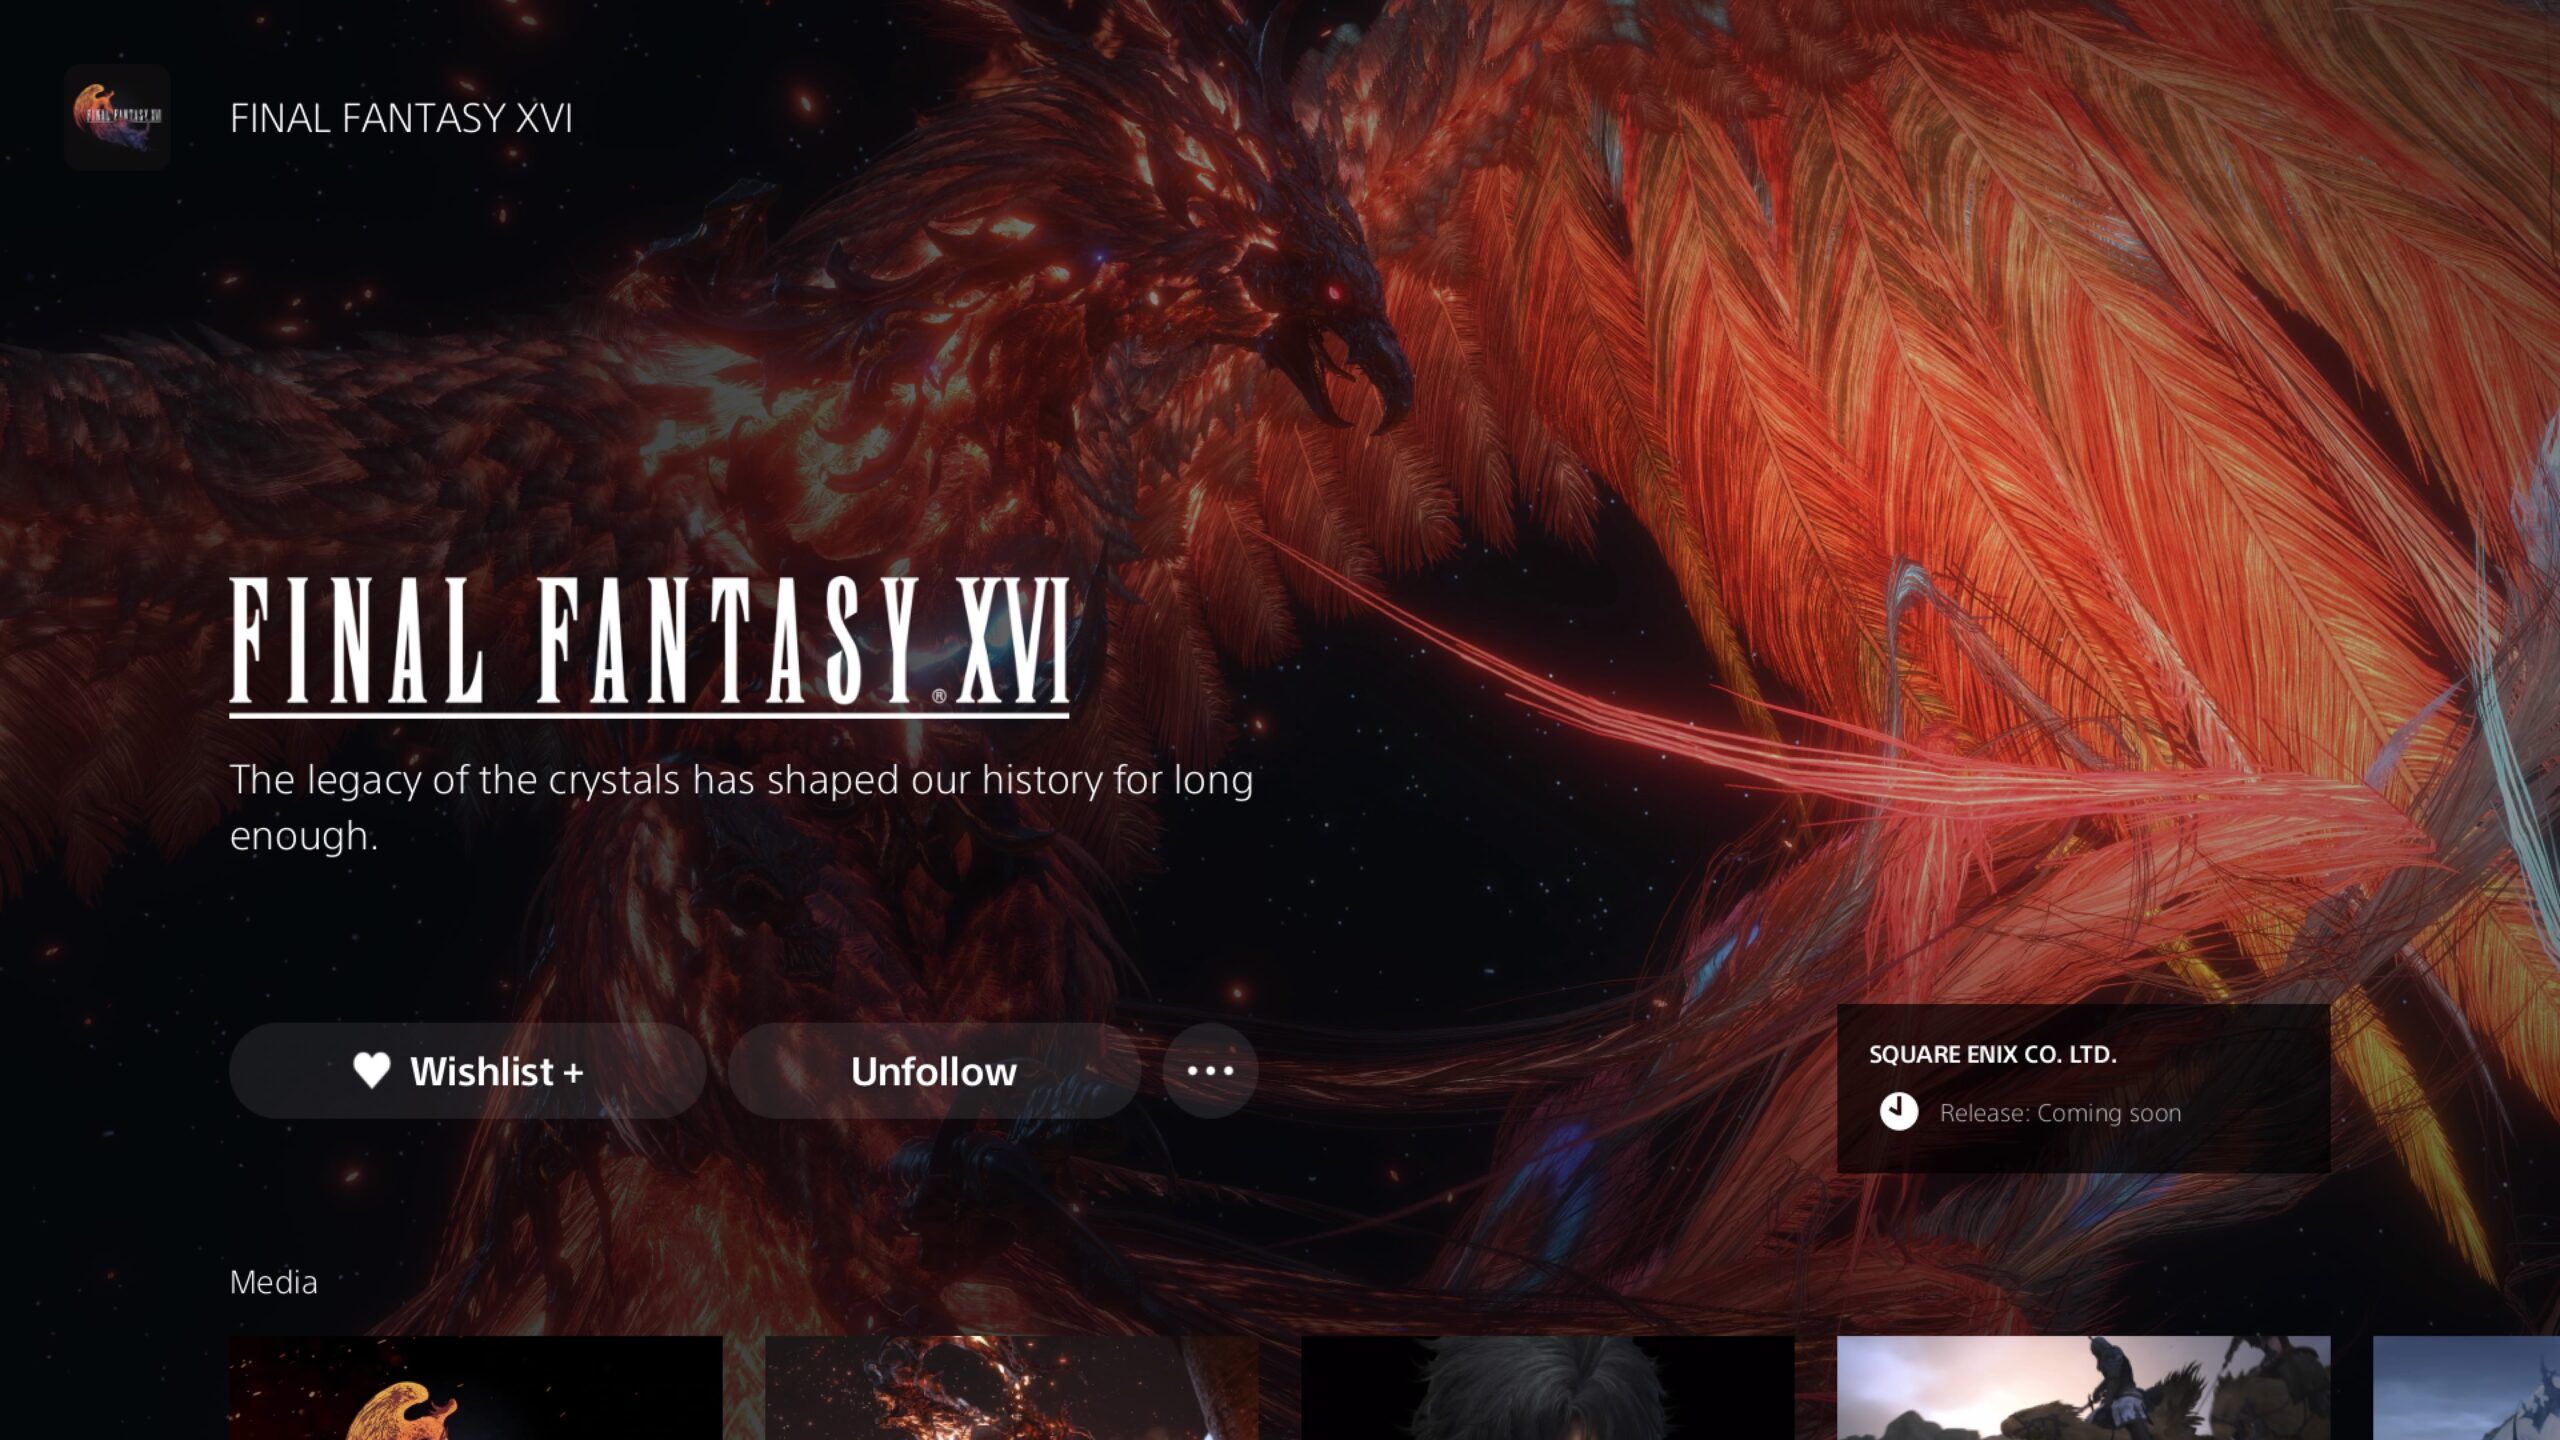 Final Fantasy XVI Release Date Updated To Coming Soon On PlayStation Store